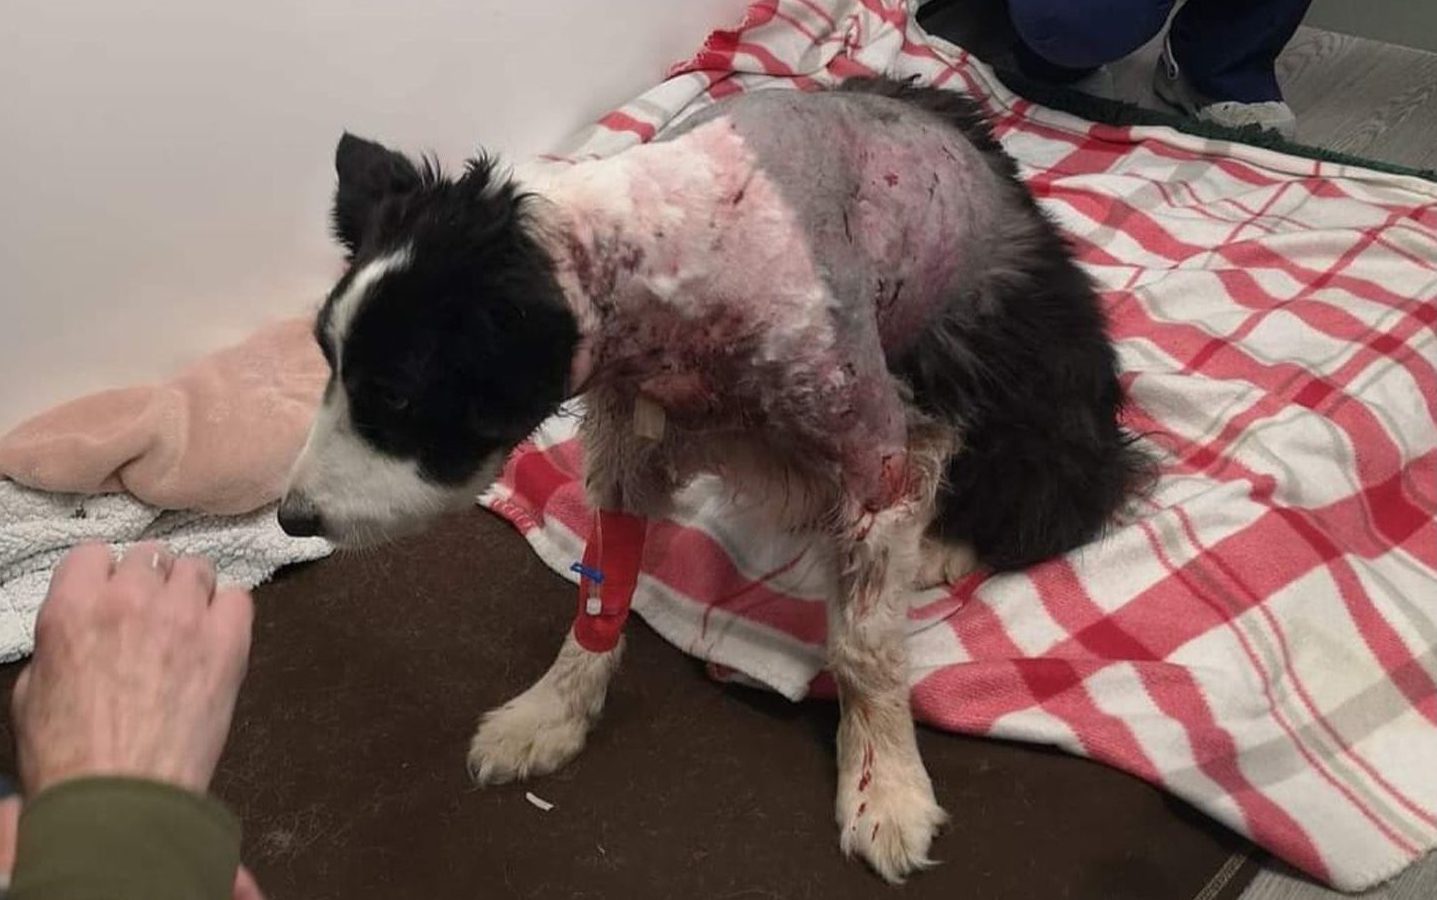 Missy died of her injuries following the Fife dog attack